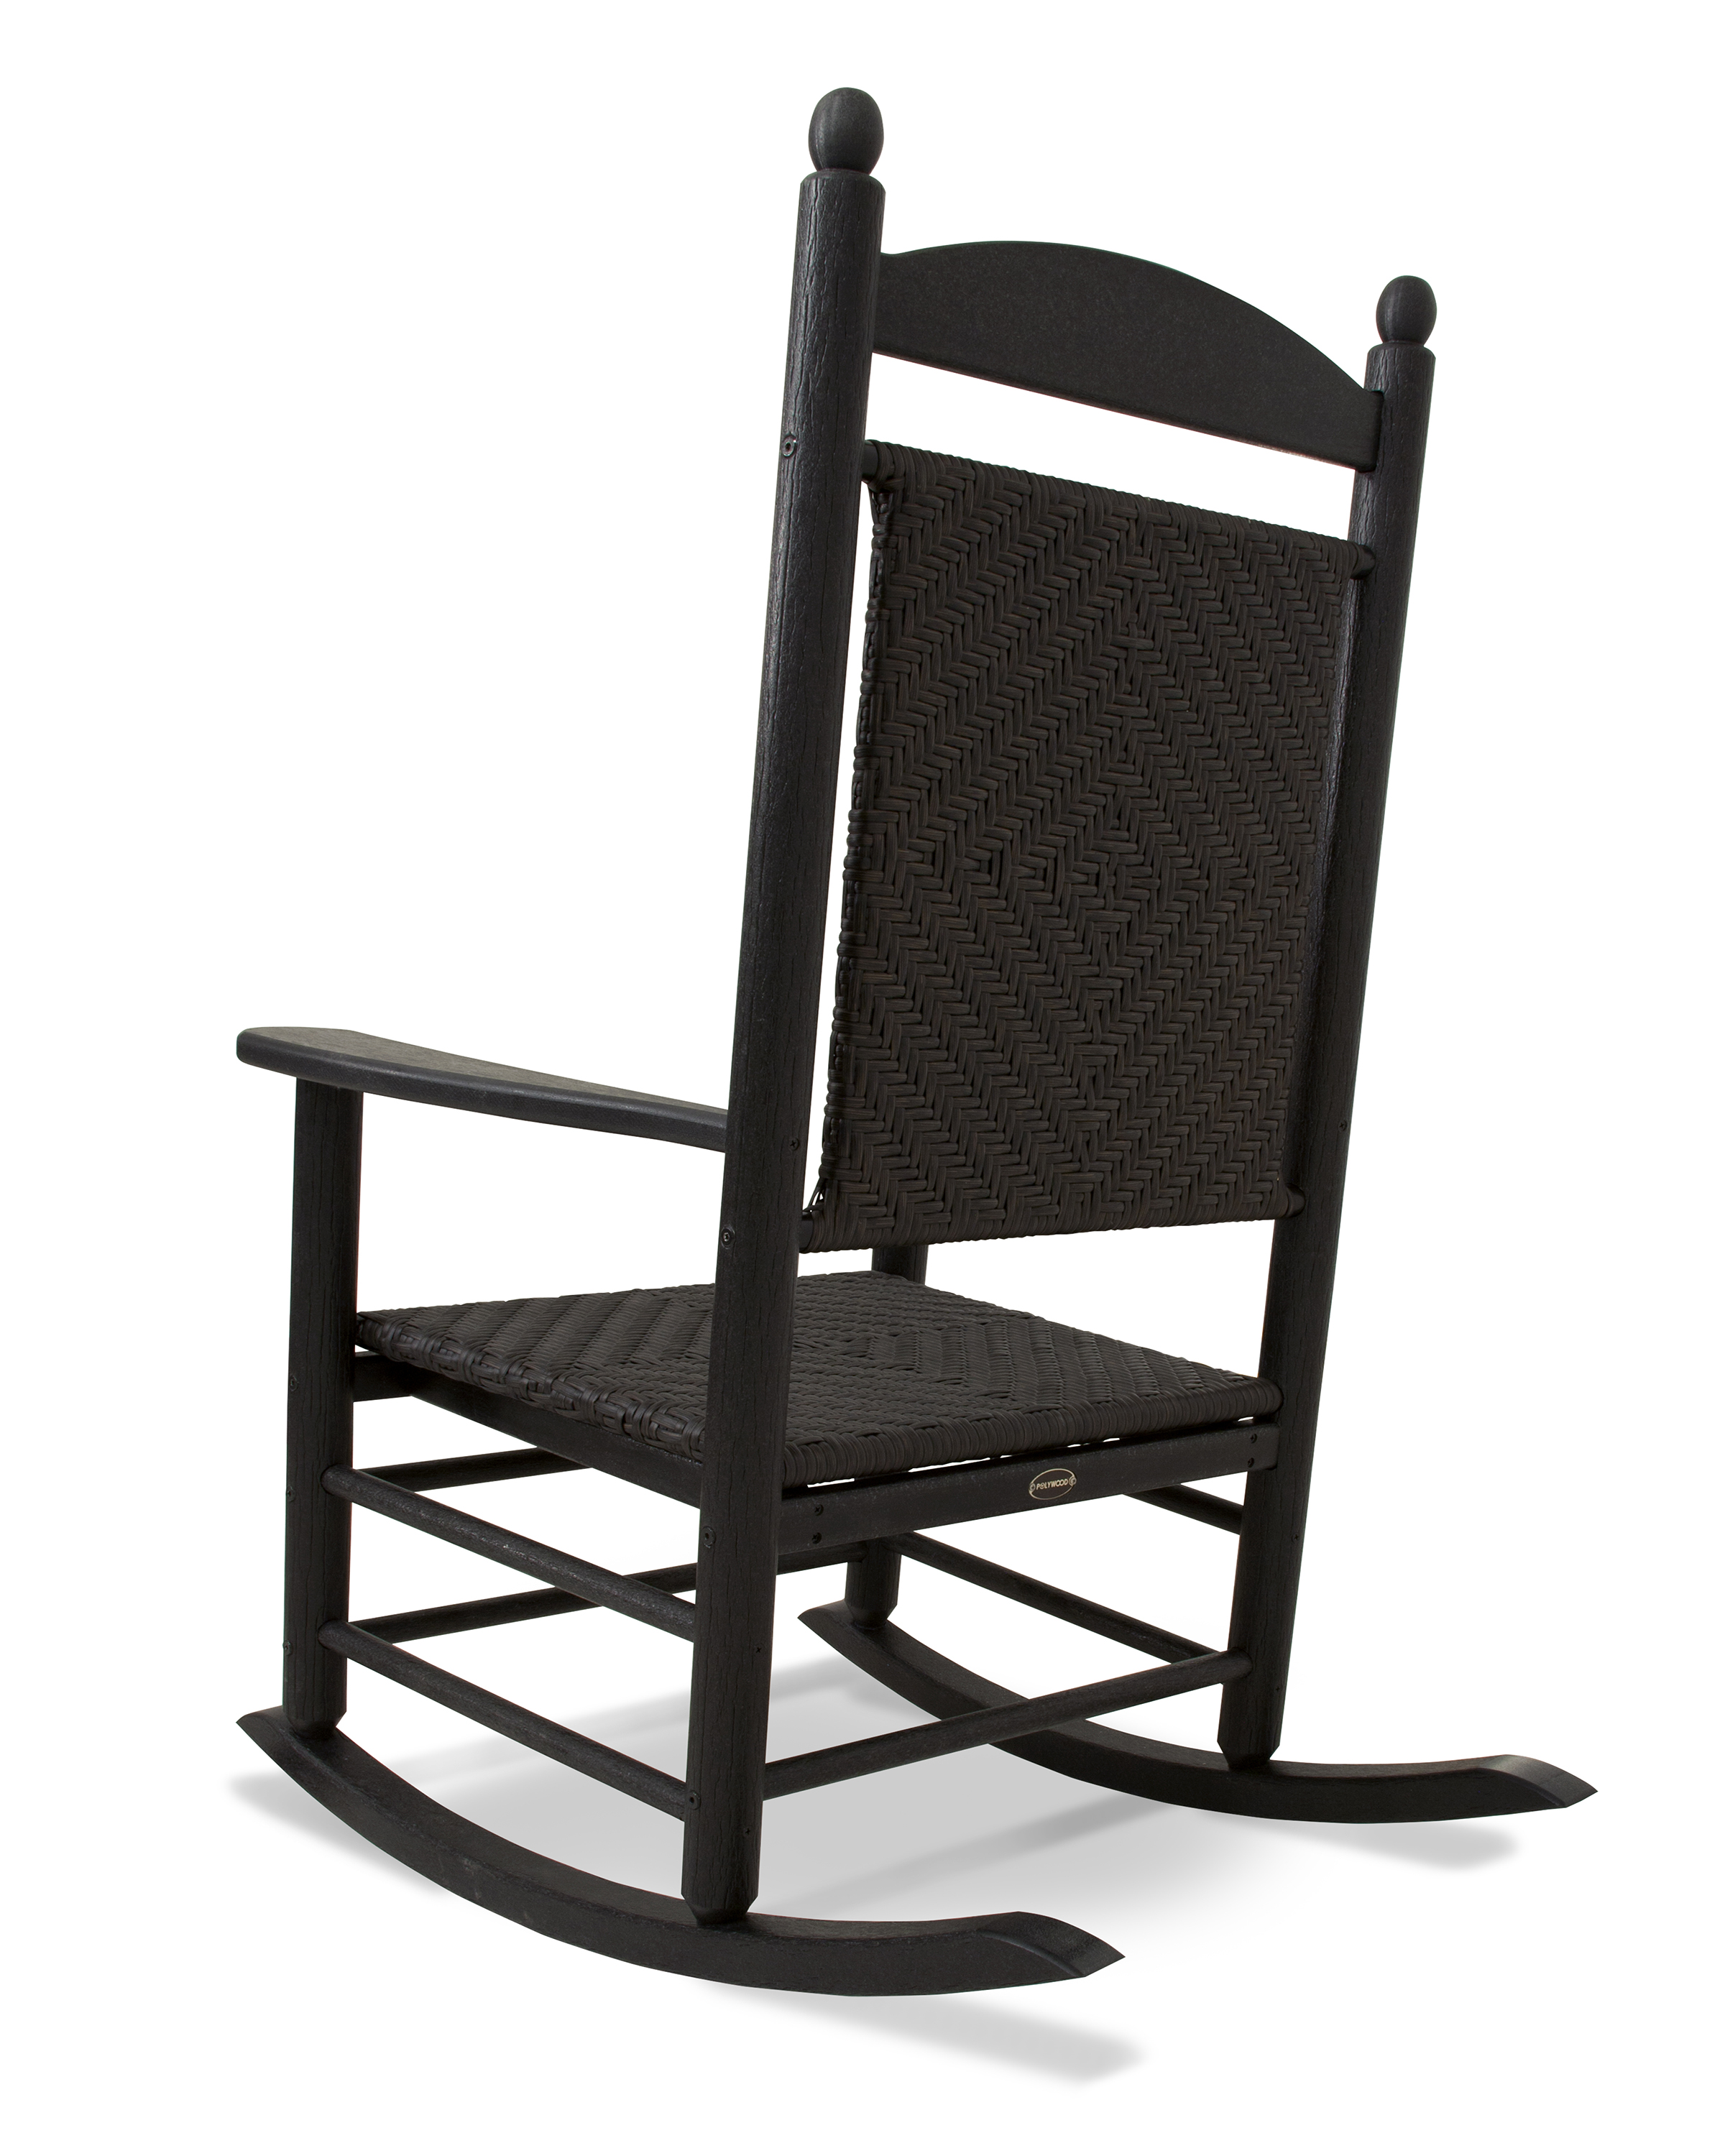 This Traditional Rocker, With Its Unique Detailing, Is Further Enhanced With A Woven Seat And Back. Polywood Furniture Is Constructed Of Solid Polywood Lumber That